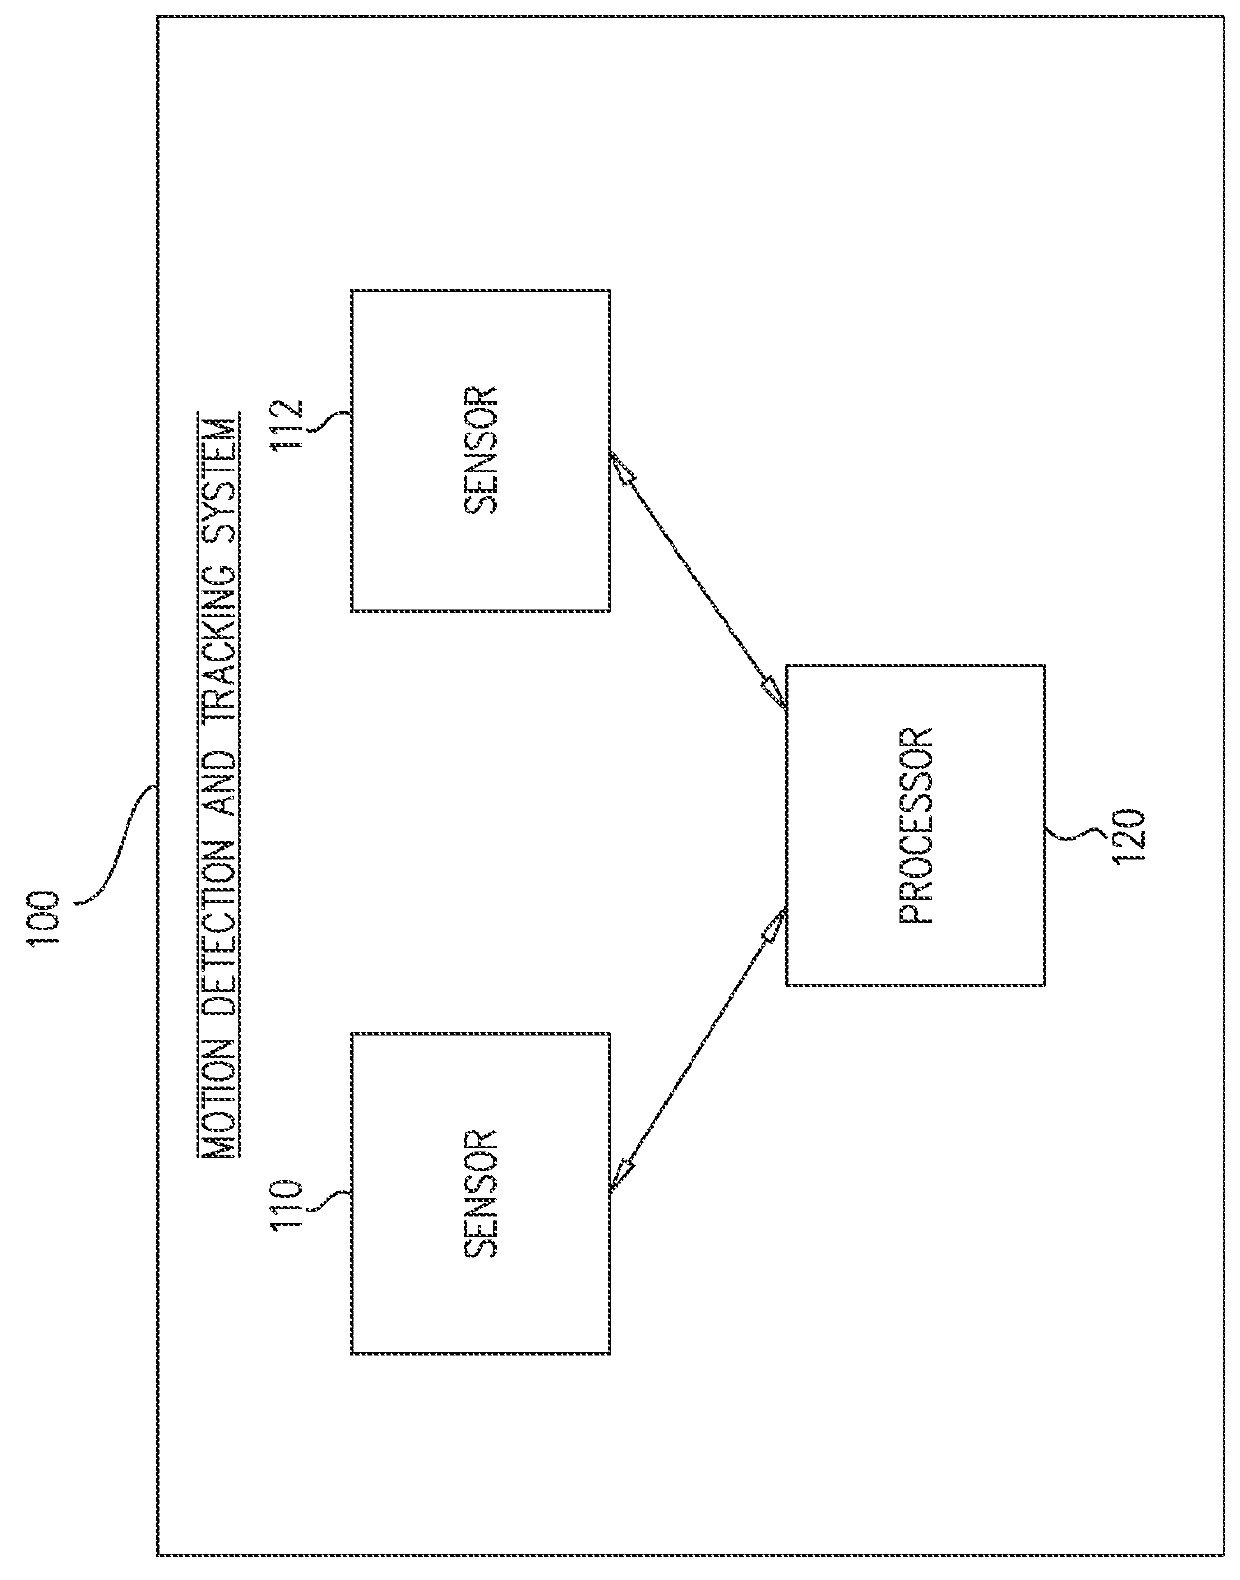 Method and system for passive tracking of moving objects